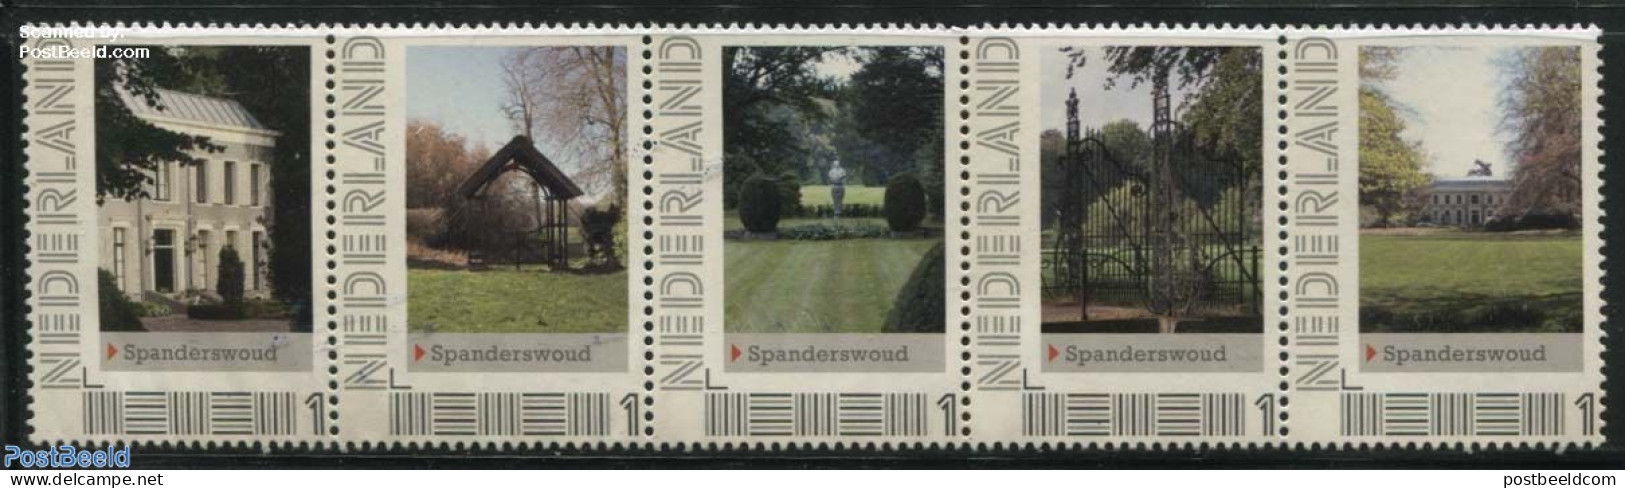 Netherlands - Personal Stamps TNT/PNL 2012 Spanderswoud 5V [::::], Mint NH, Nature - Trees & Forests - Castles & Forti.. - Rotary Club